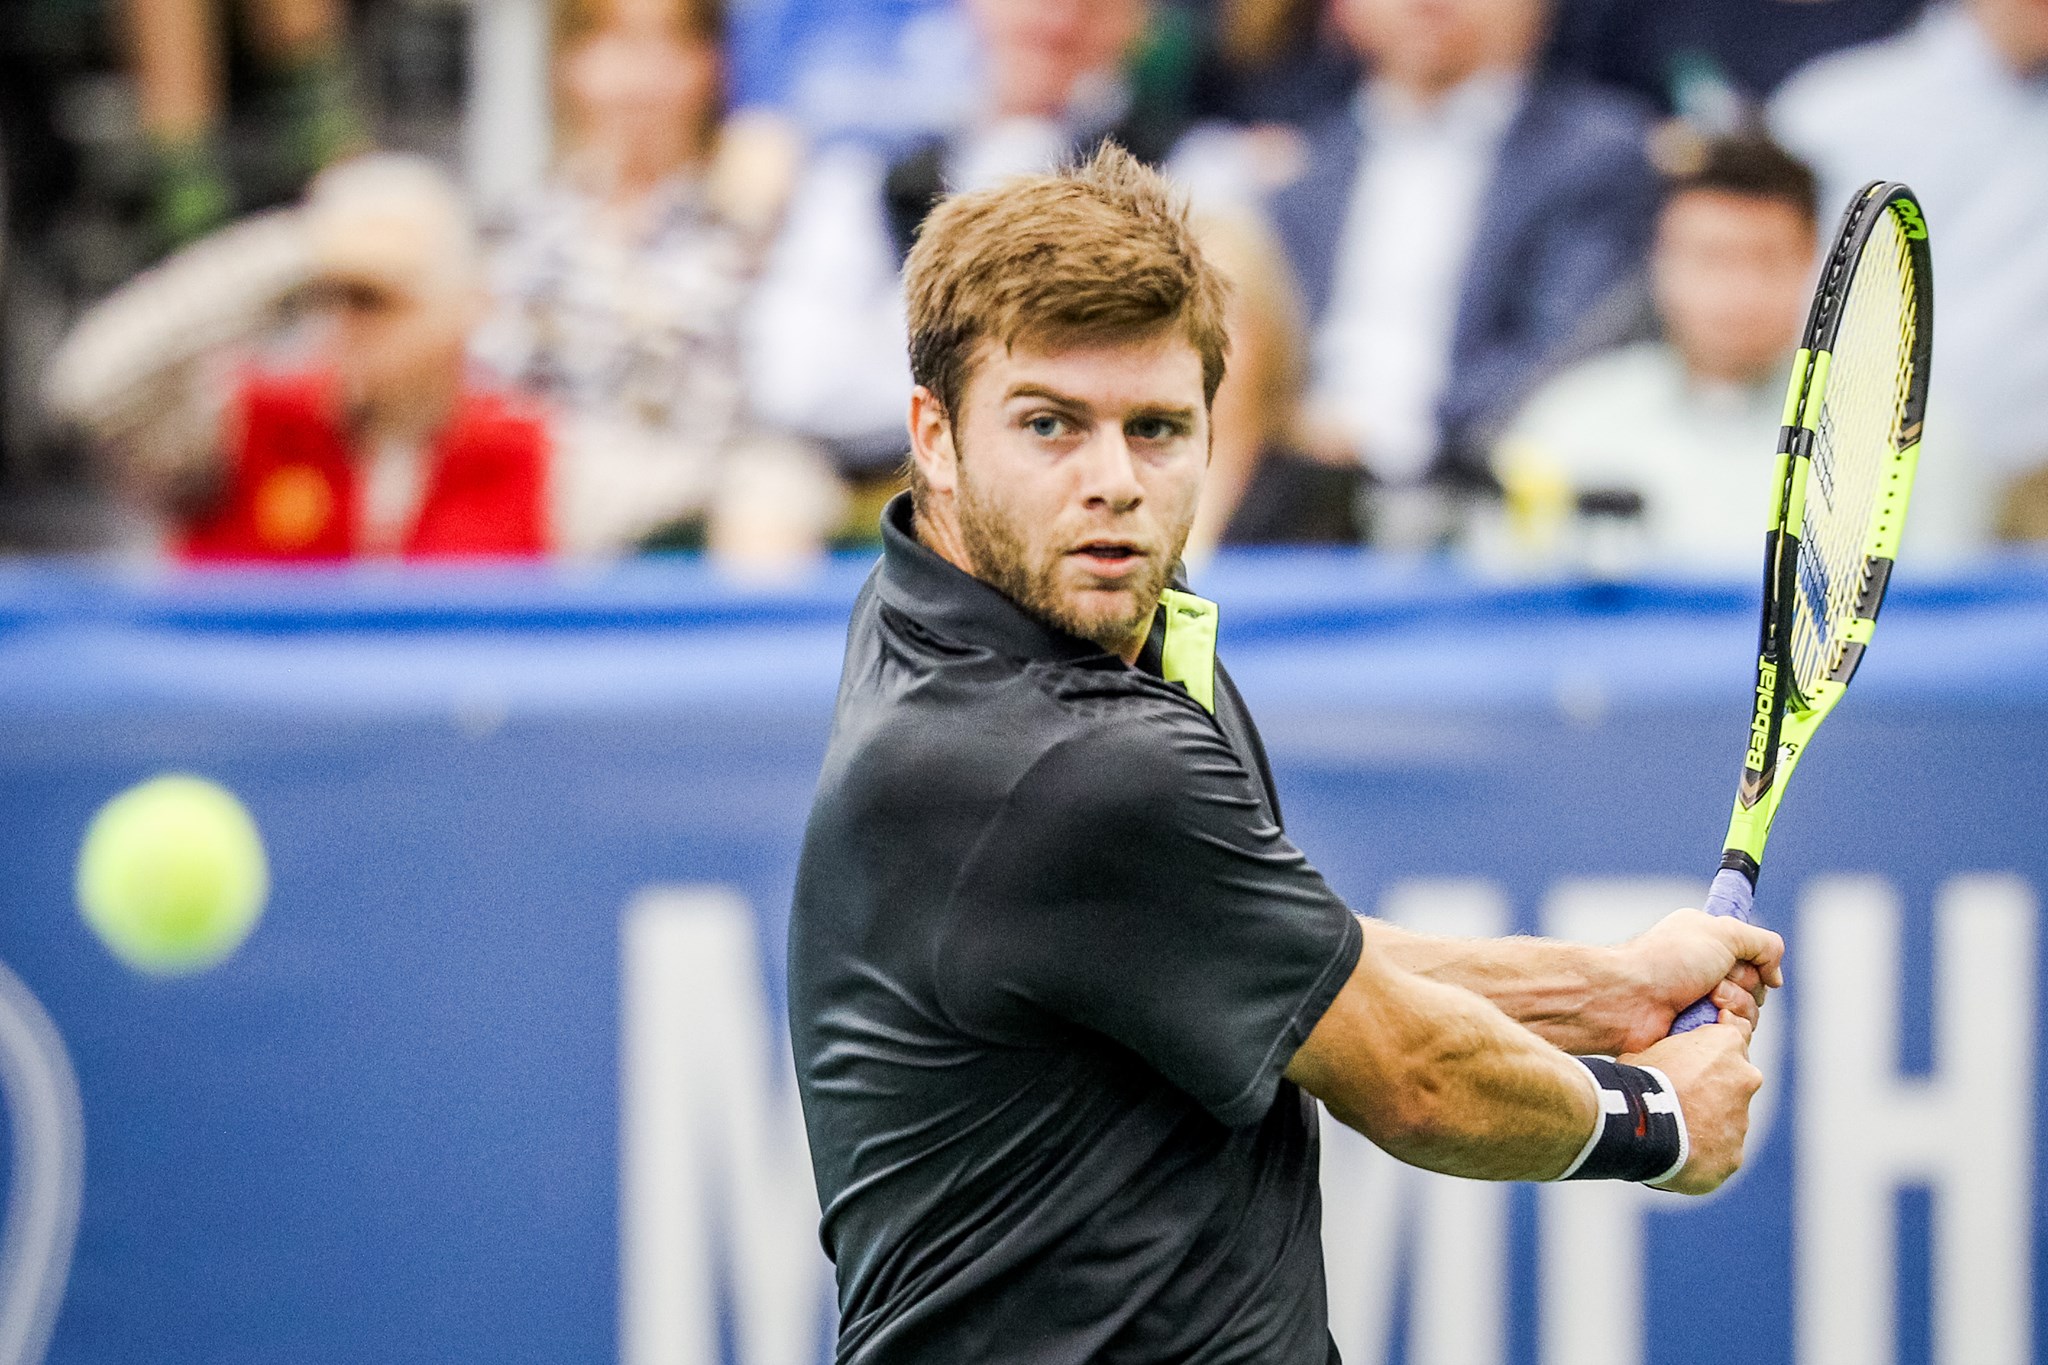 Ryan Harrison Clears Name, but Bad Blood with Donald Young Still Remains  